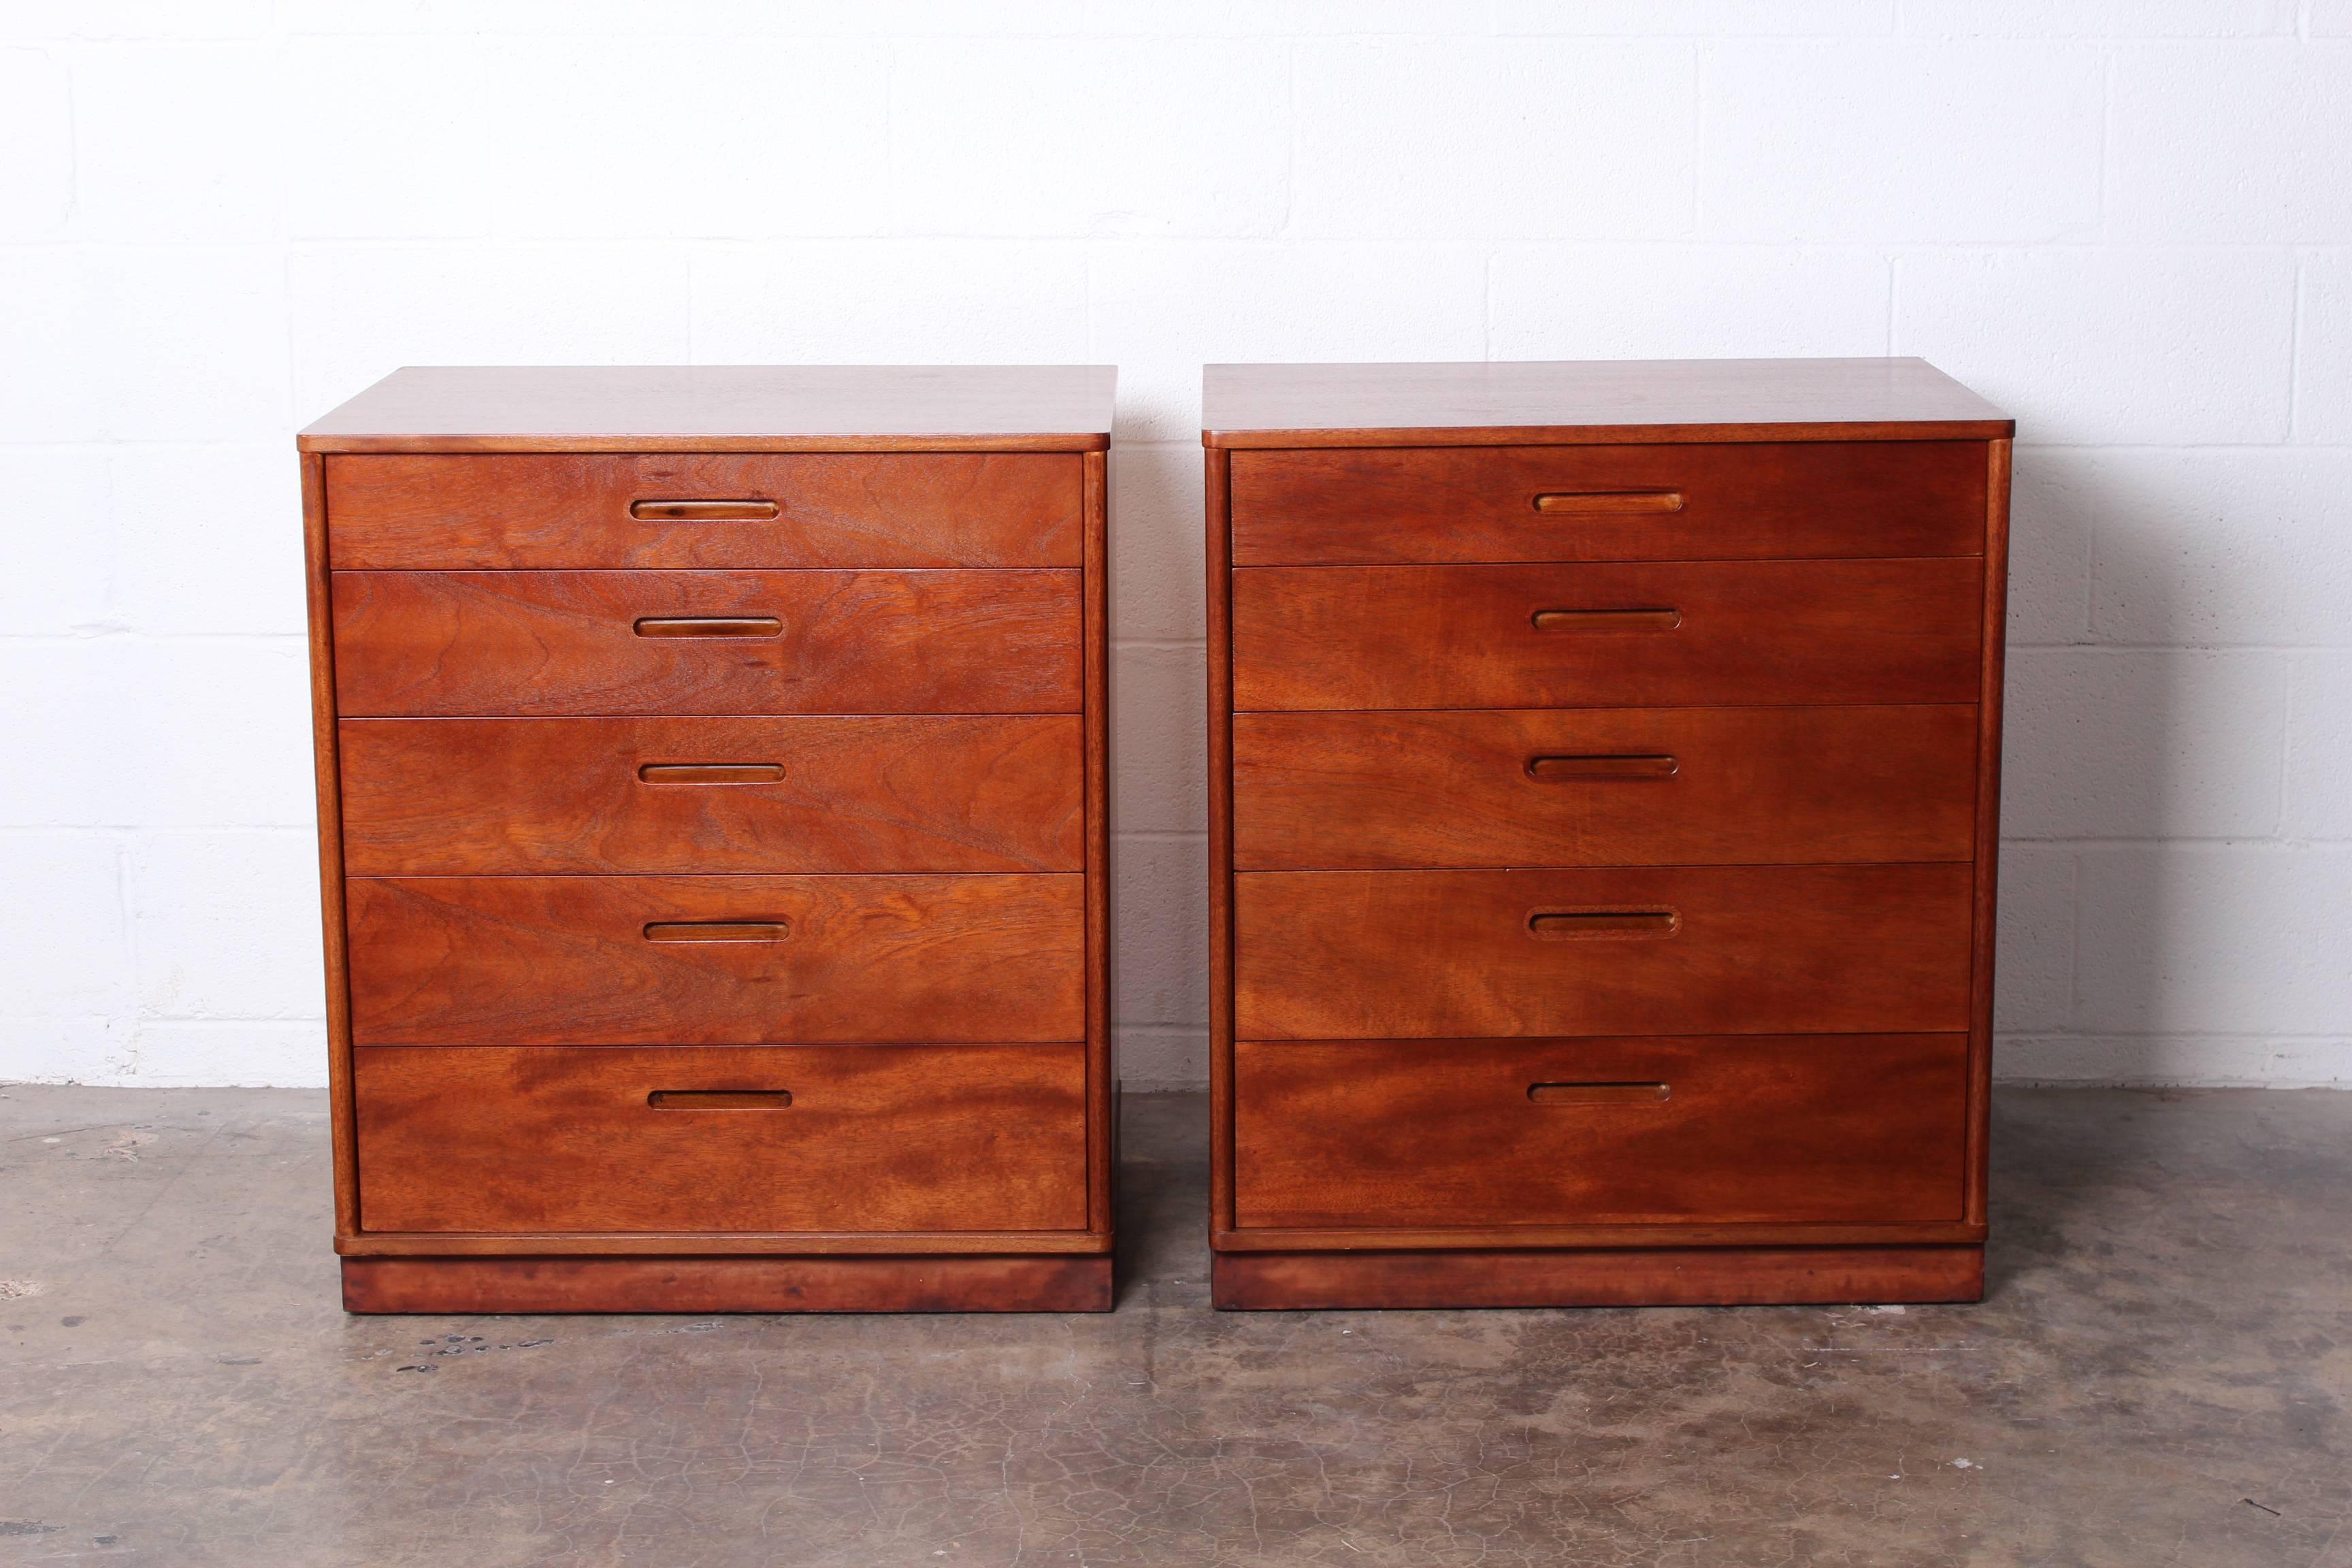 A pair of mahogany bedside tables or dressers with leather wrapped plinth bases. Designed by Edward Wormley for Dunbar.